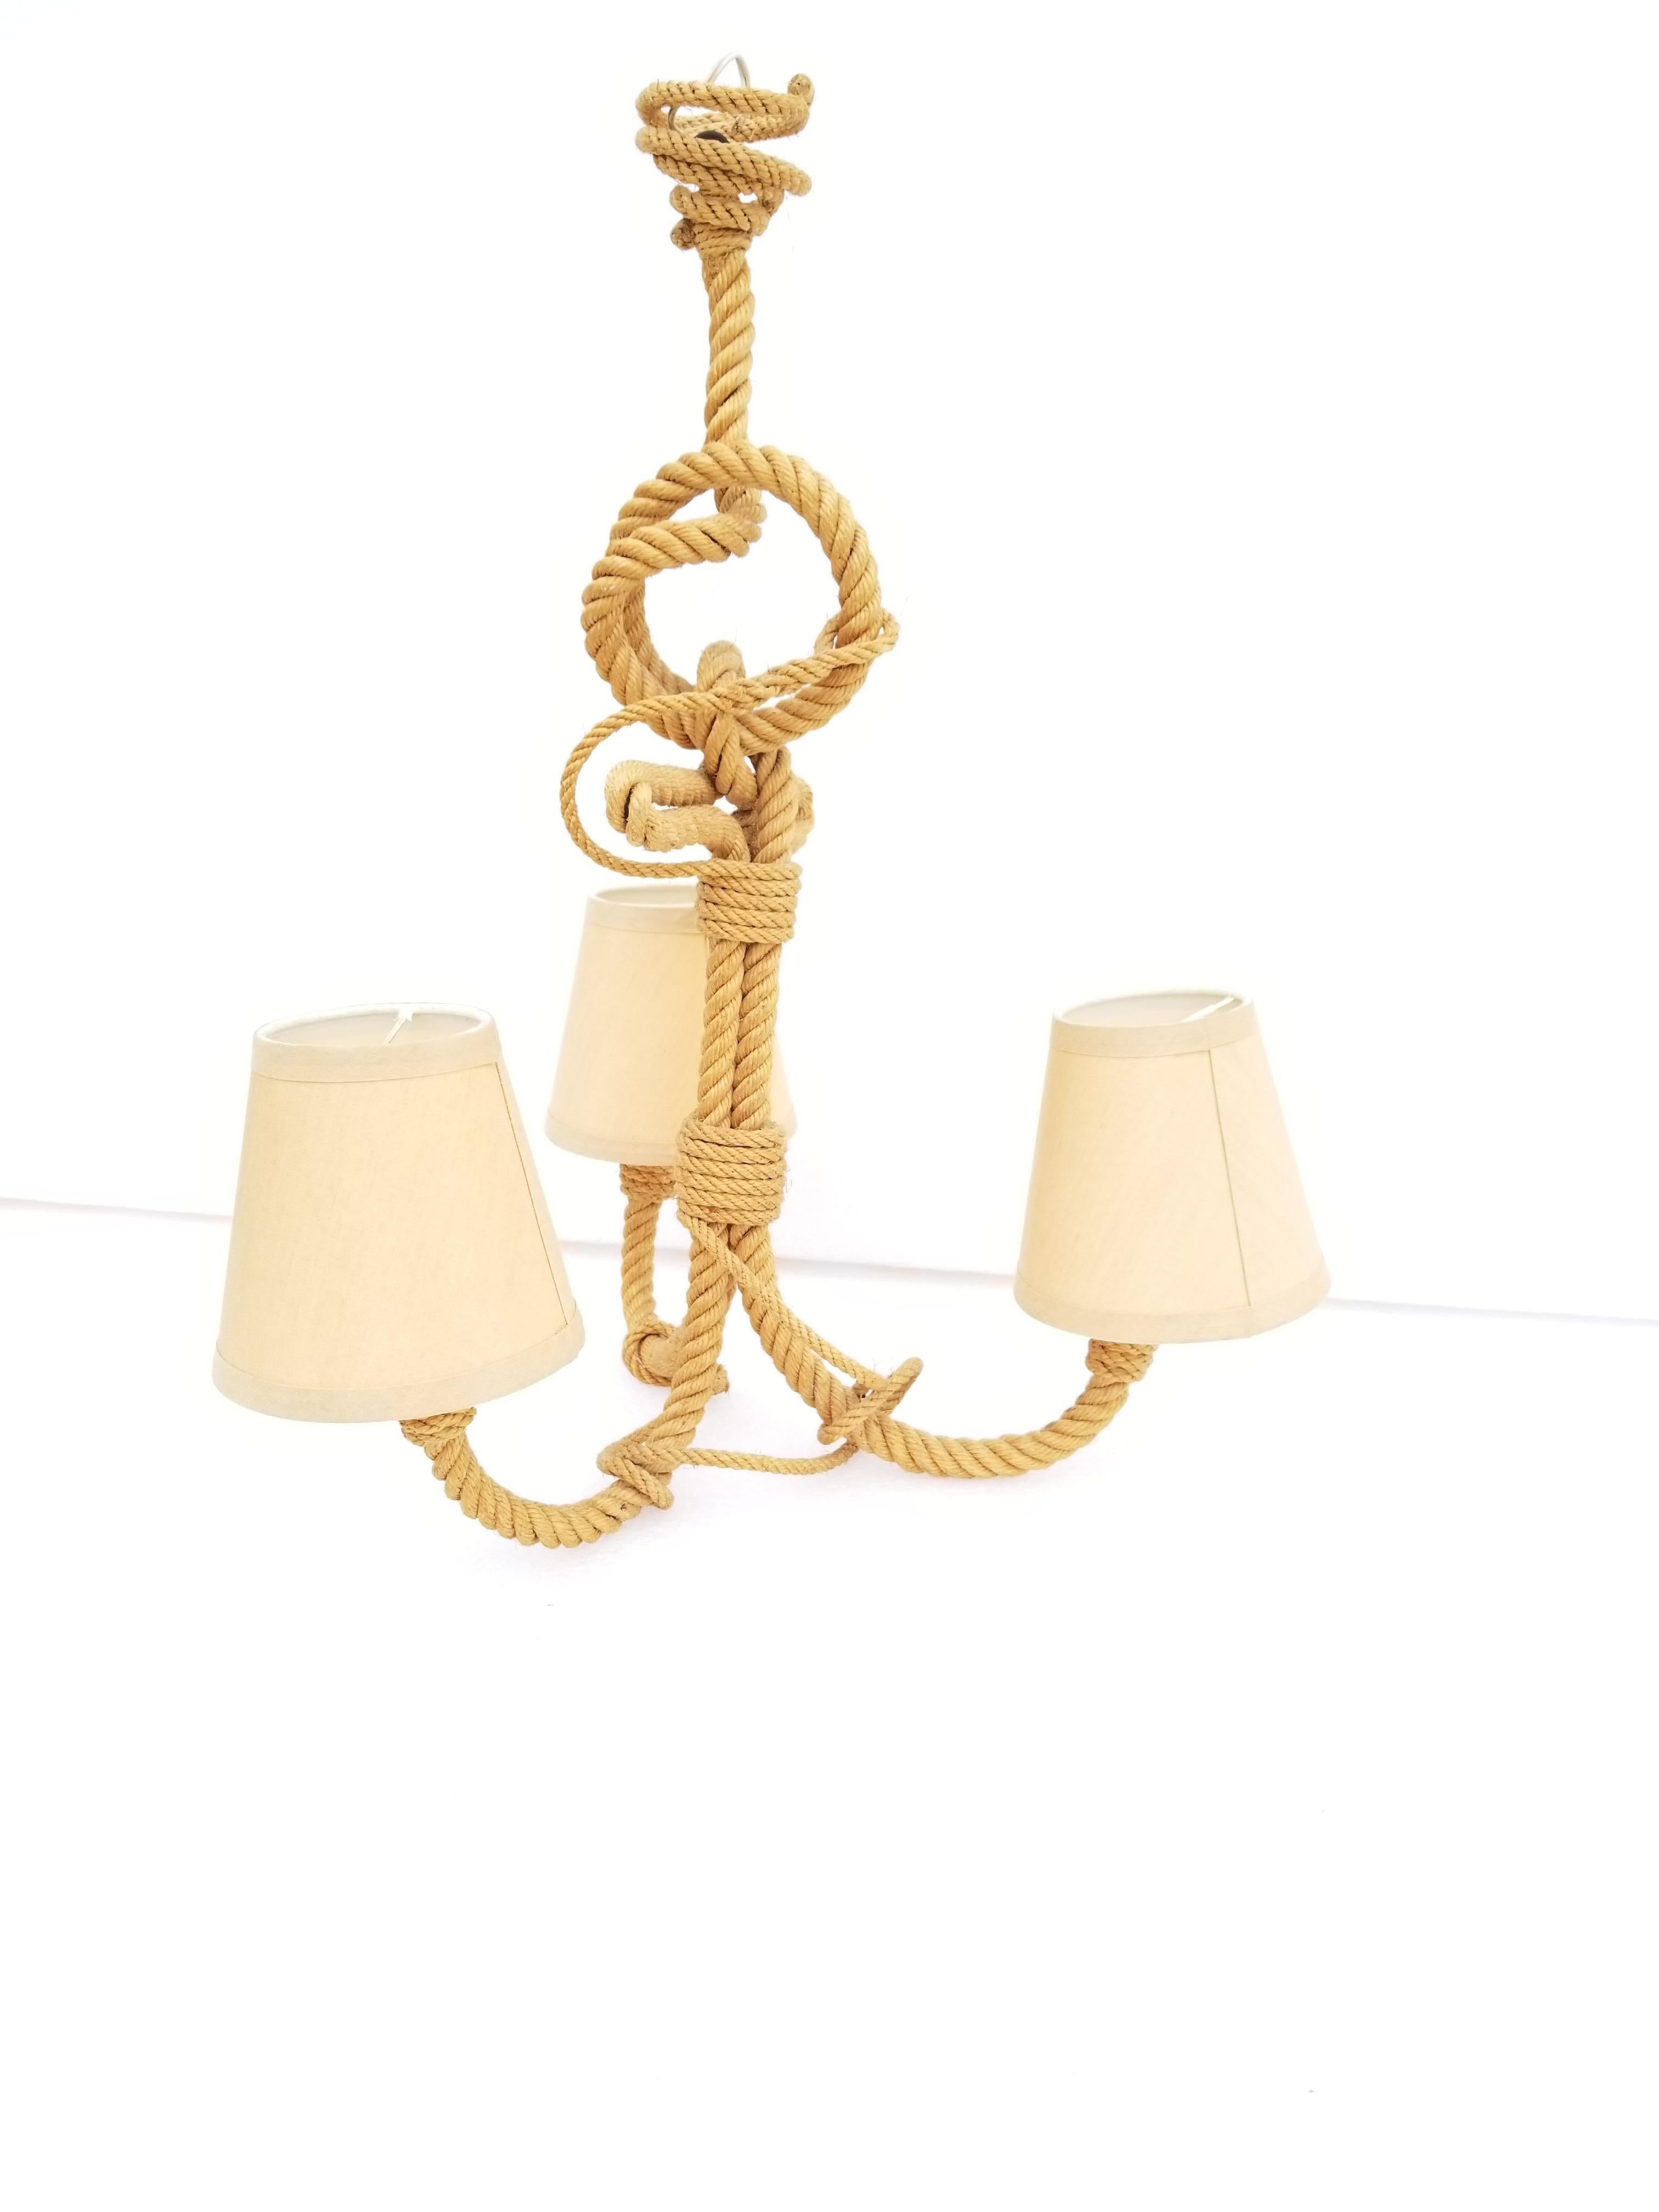 Mid-20th Century Audoux Minet 3-Light French Rope Chandelier